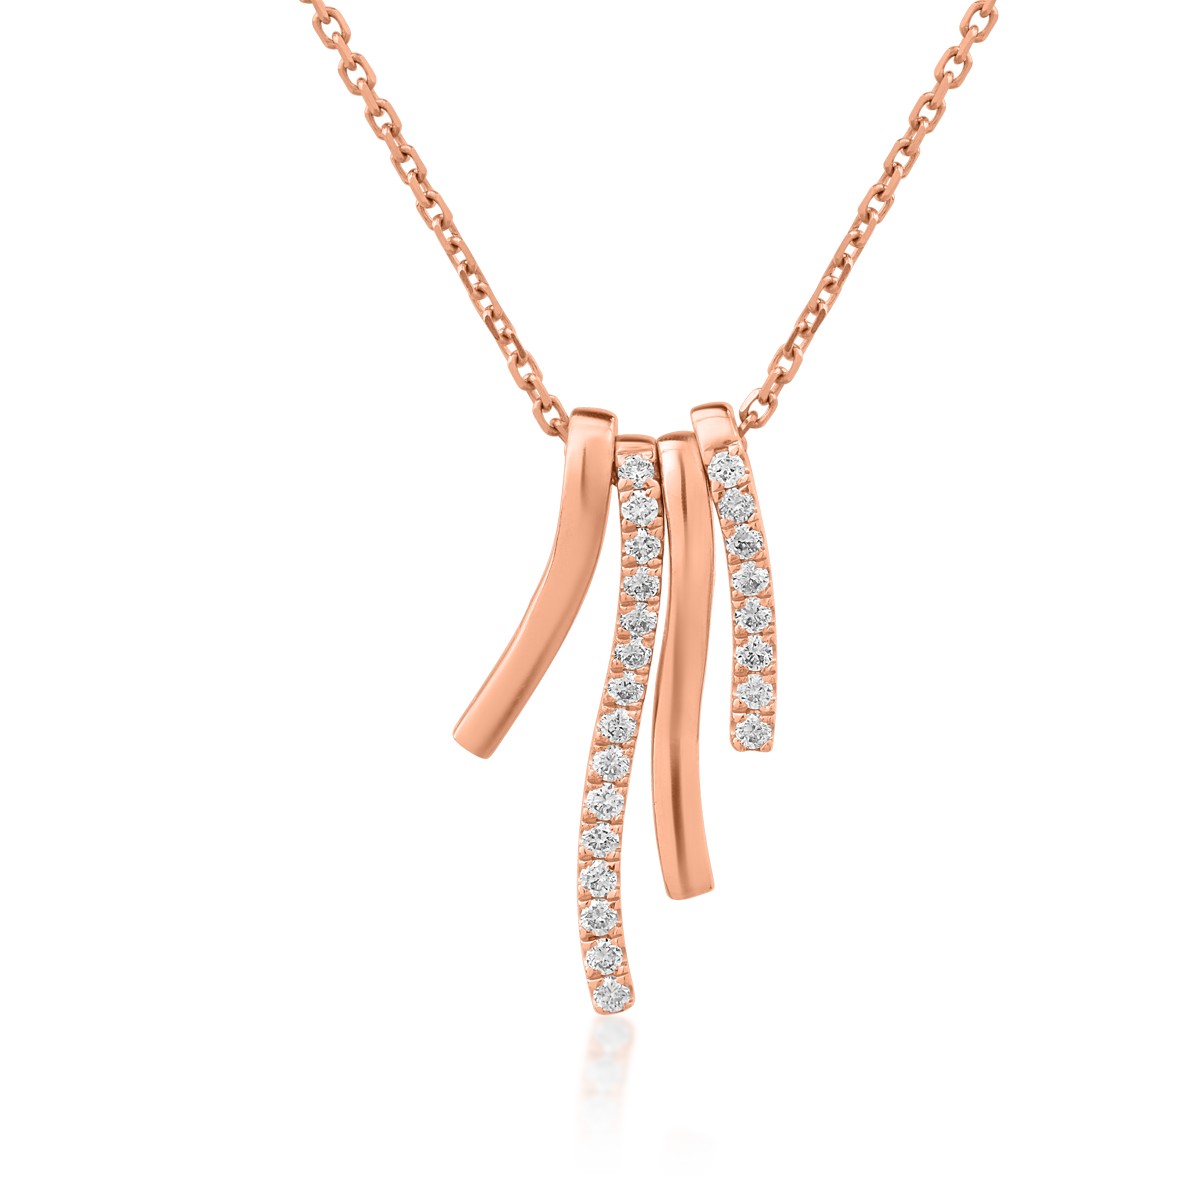 18K rose gold pendant necklace with 0.093ct diamonds